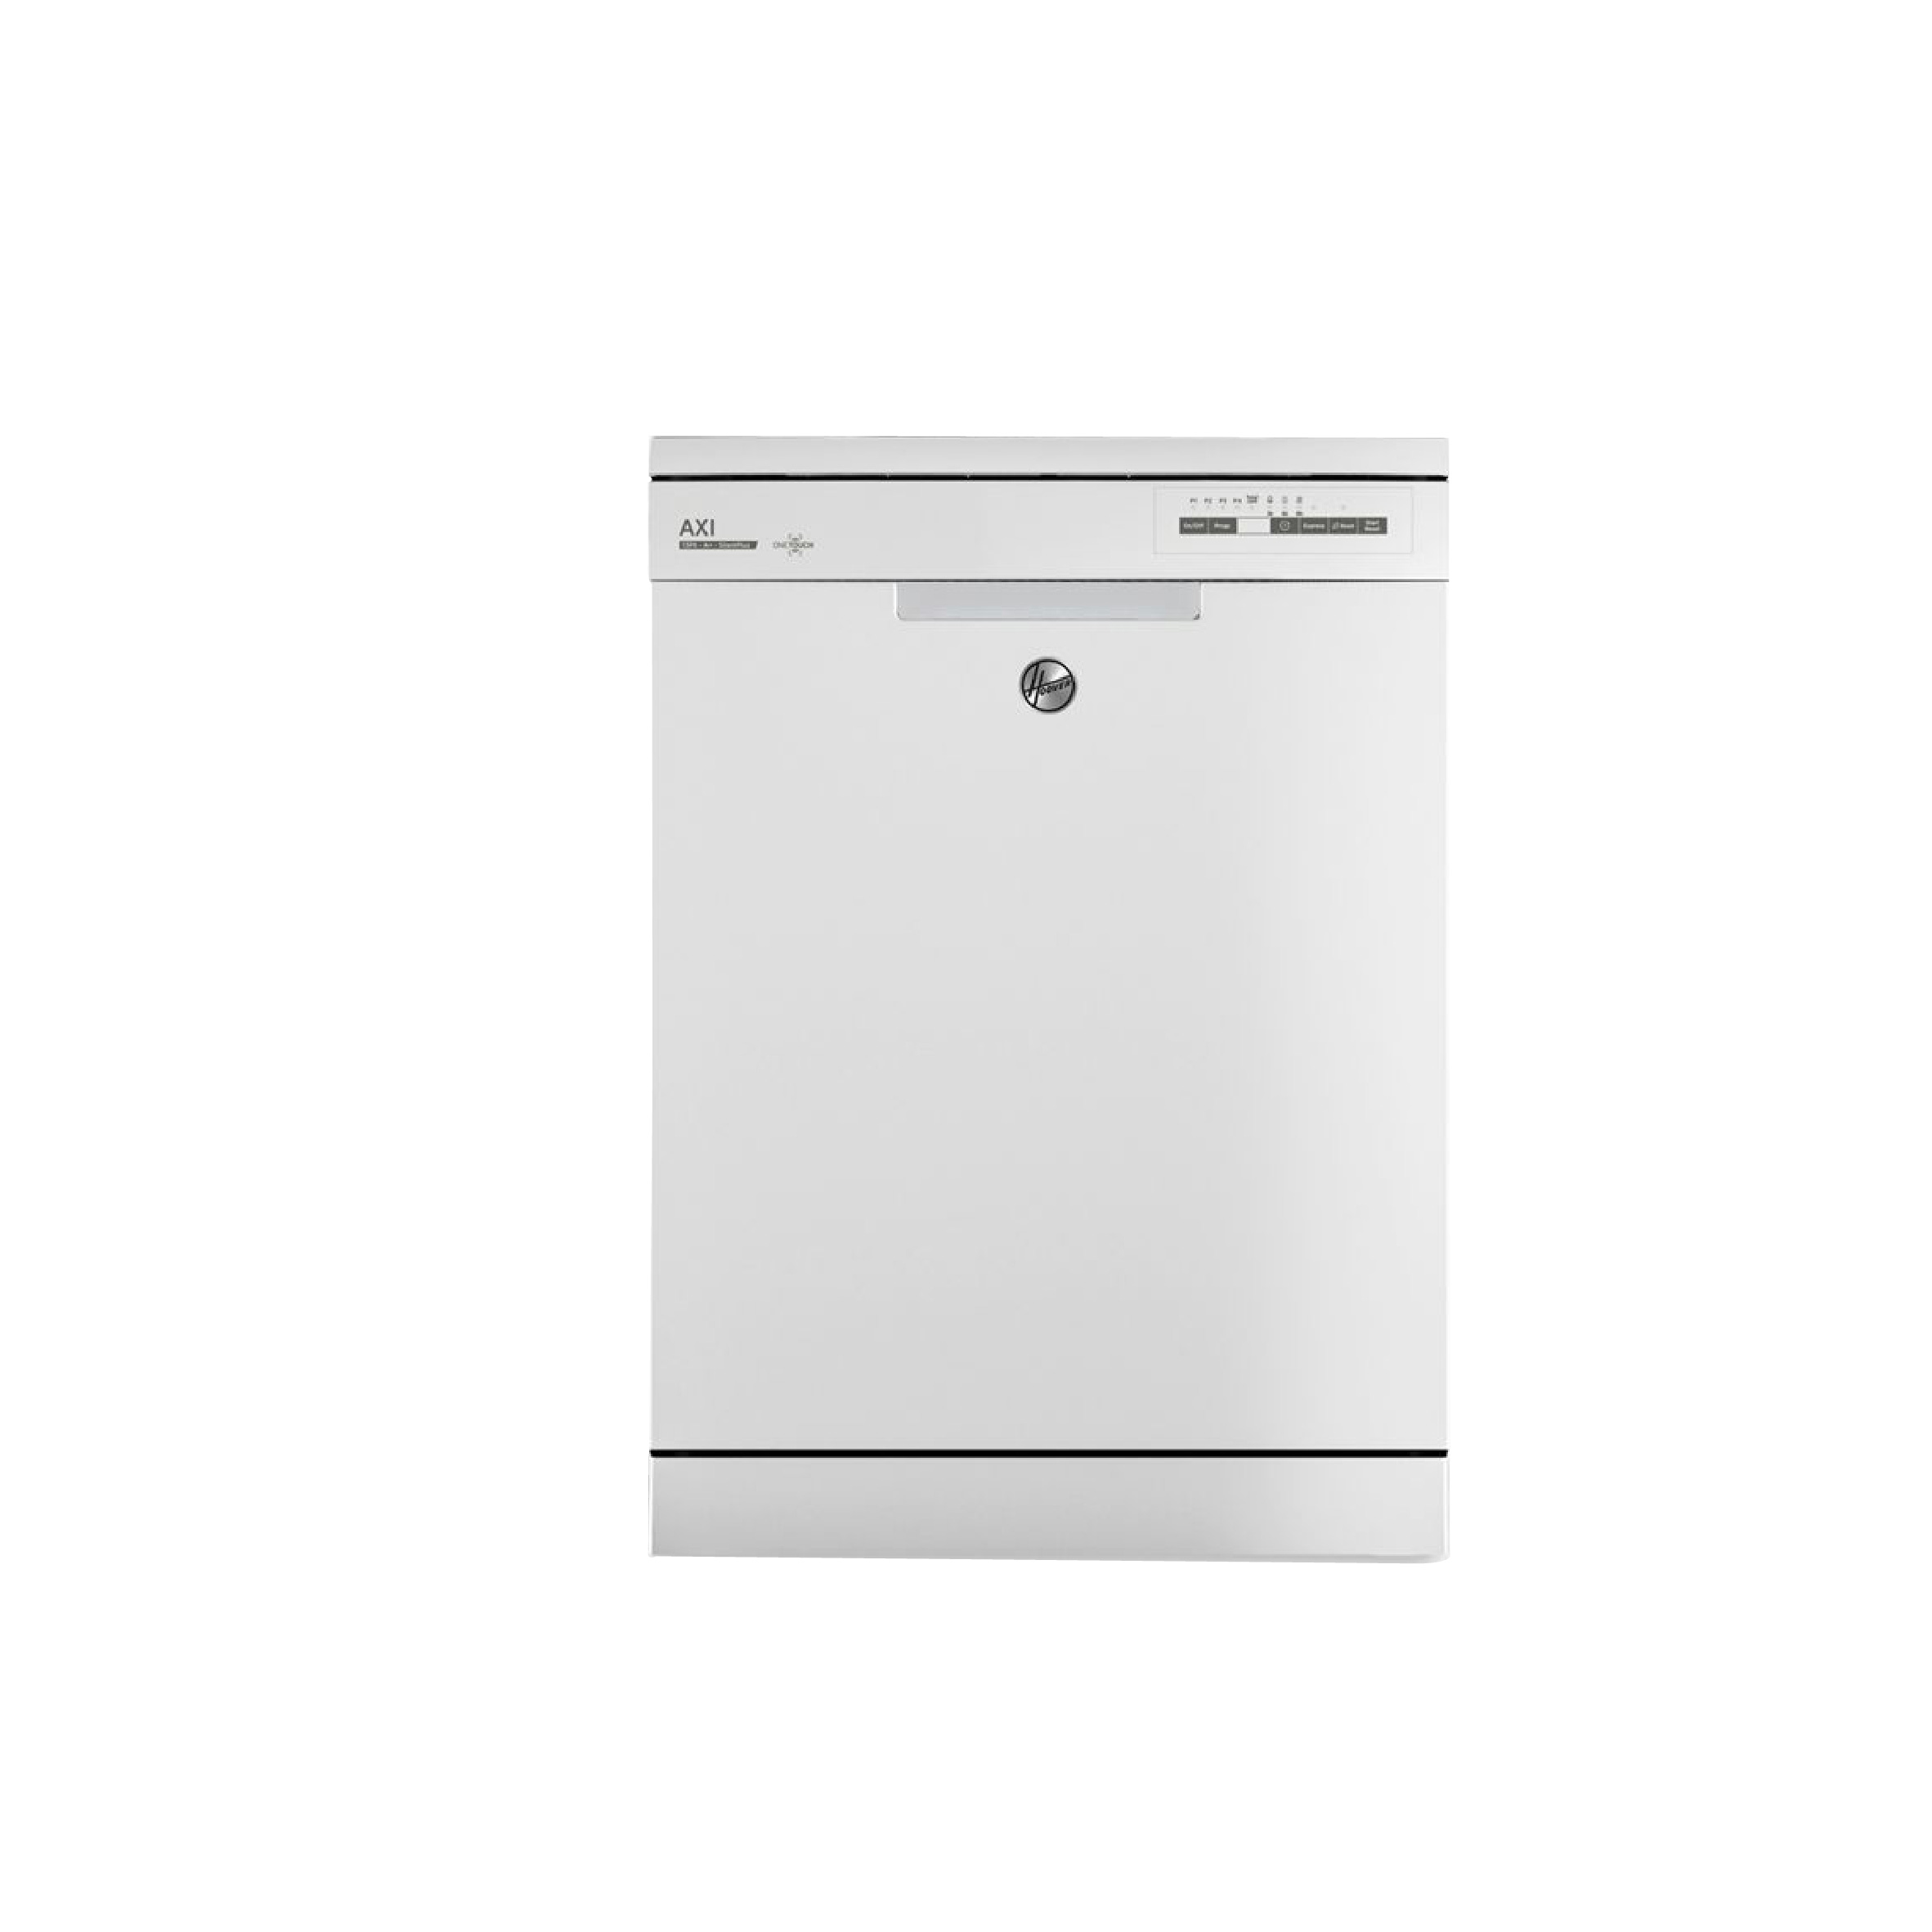 Hoover Dishwasher 13 Settings White, HDPN1L390OW